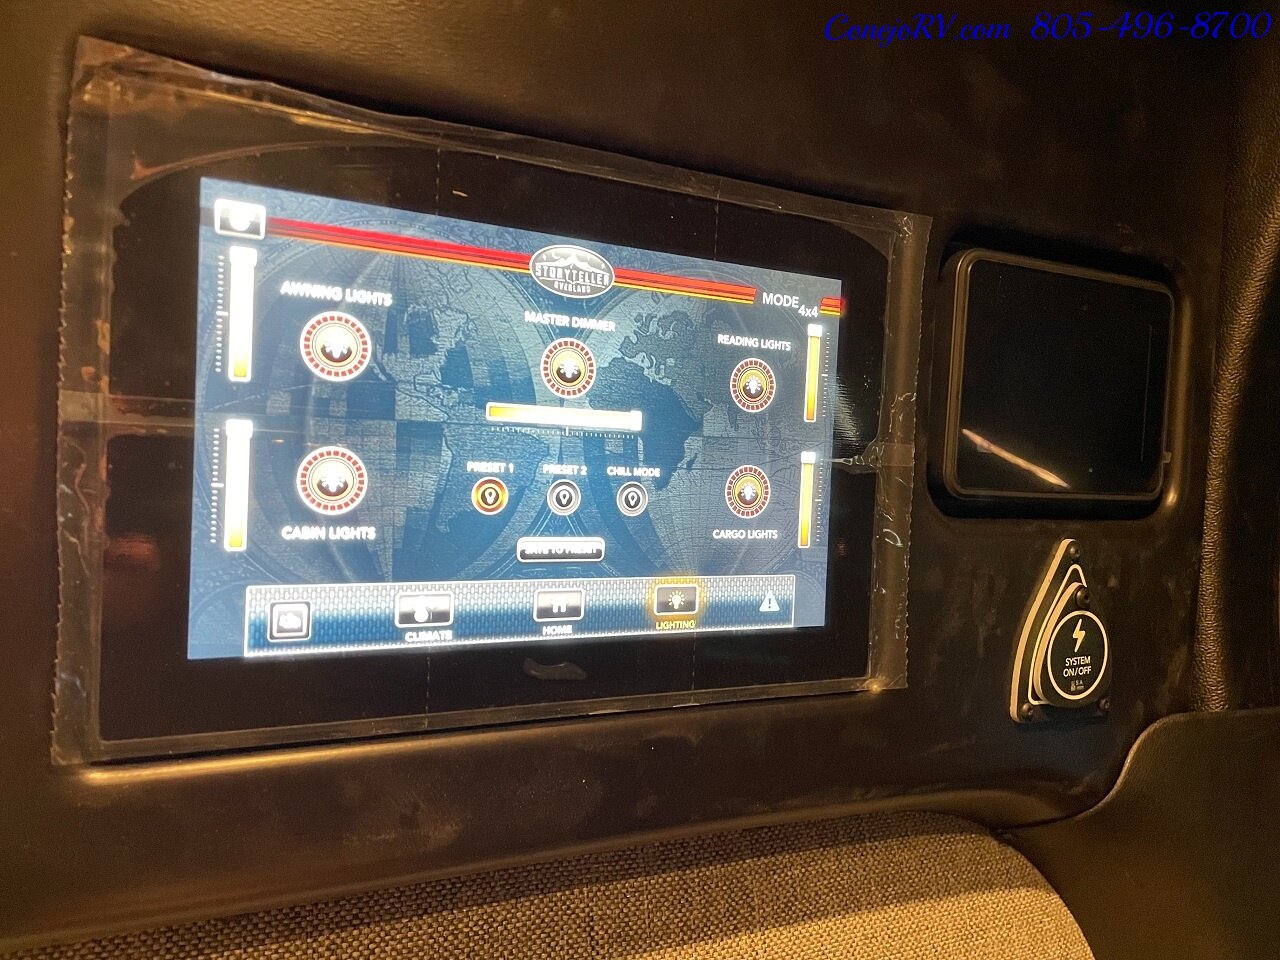 2023 Storyteller Overland Stealth Mode AWD DEALER DEMO 4 cyl H.O.with 9 Speed  Transmission - Photo 10 - Thousand Oaks, CA 91360